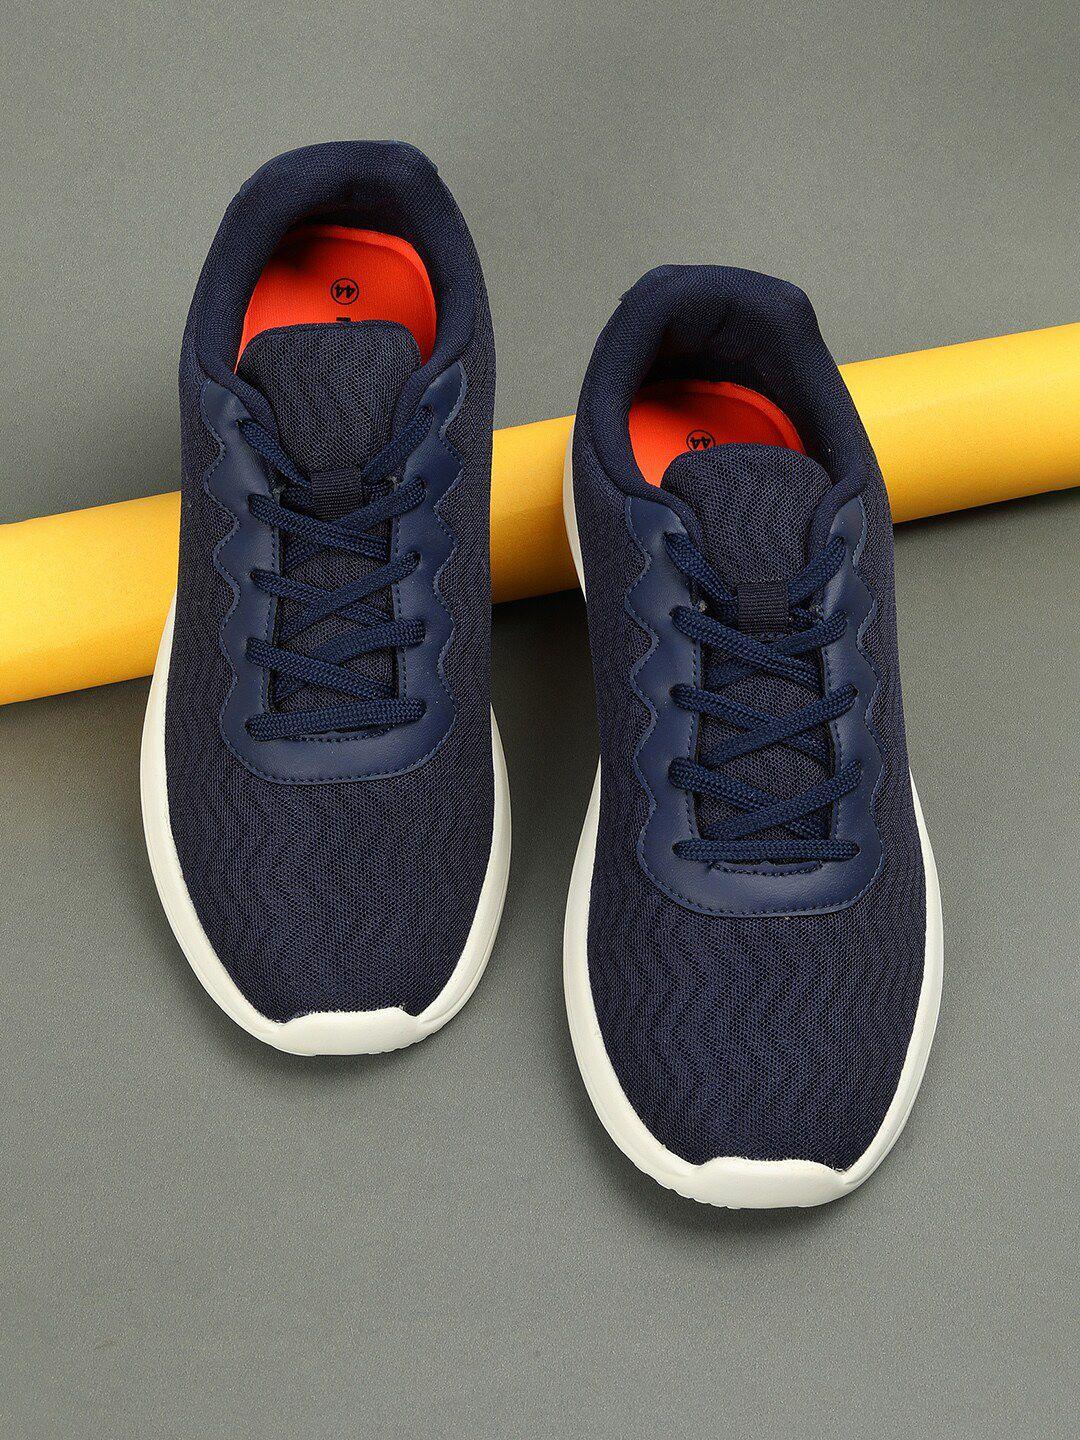 max-men-textured-lace-up-running-shoes